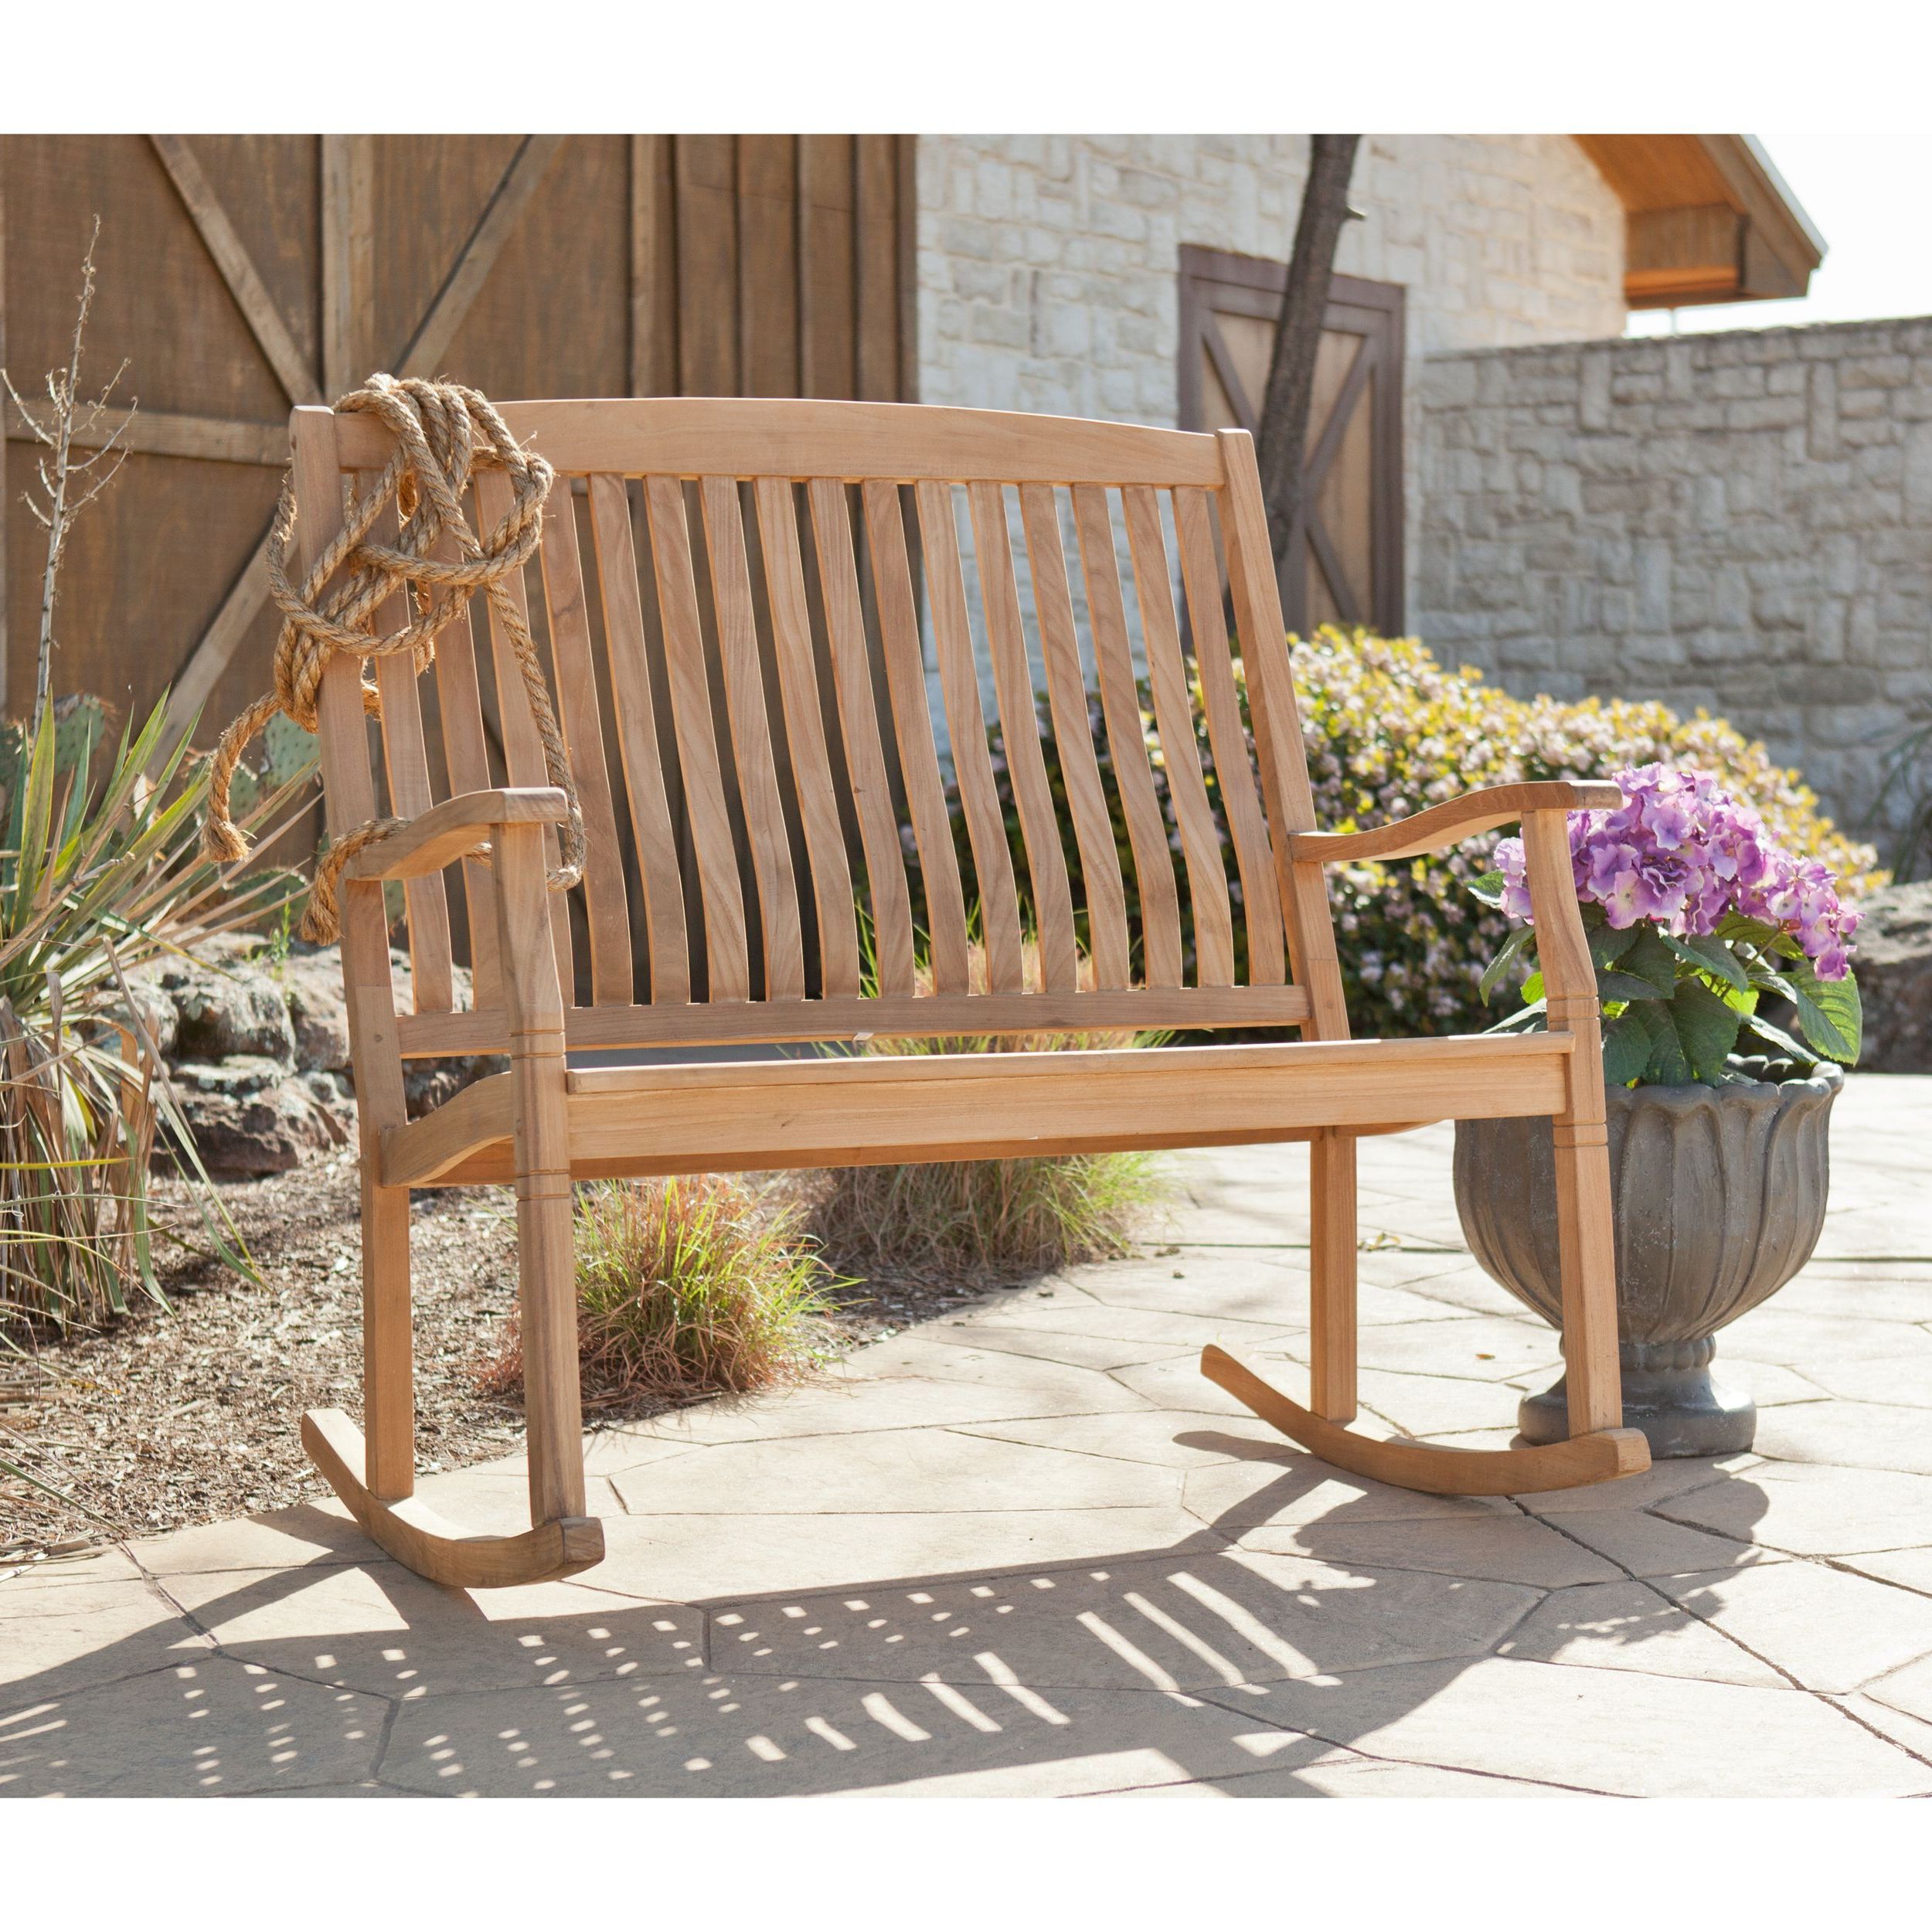 Most Up To Date The Graceful Yet Rustic Style Of This Teak Glider Bench Is Regarding Teak Outdoor Glider Benches (View 2 of 25)